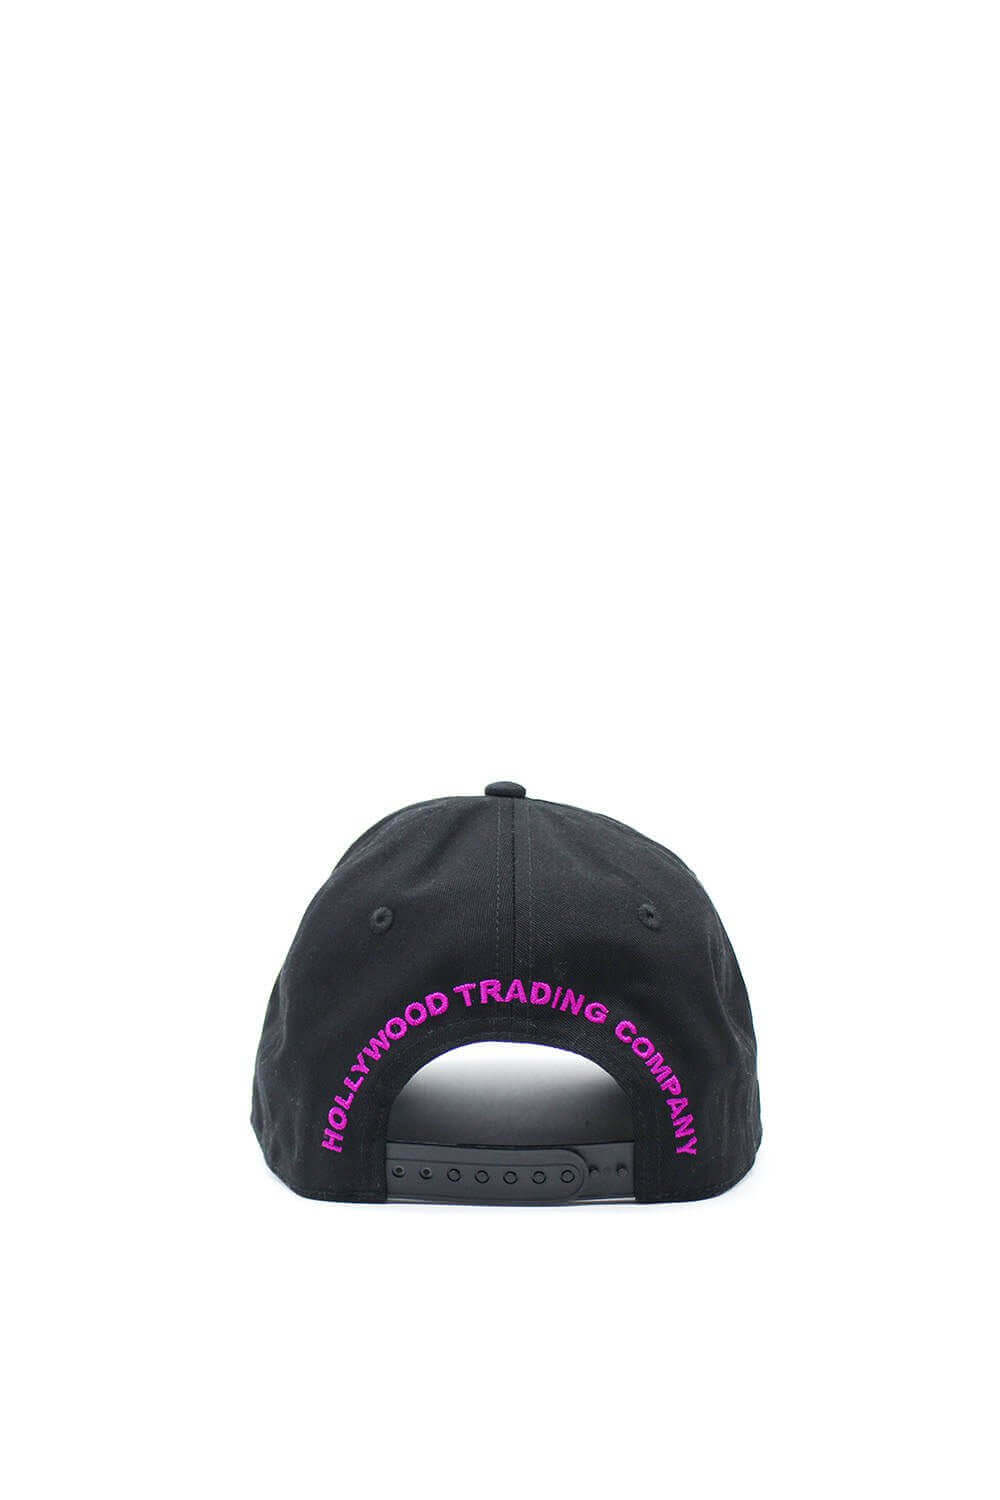 FREAK HOUSE CAP Black baseball cap , round crown with eyelets, Freak House logo embroidered on the front, adjustable strap on the back. One size fits all. 100% cotton. HTC LOS ANGELES